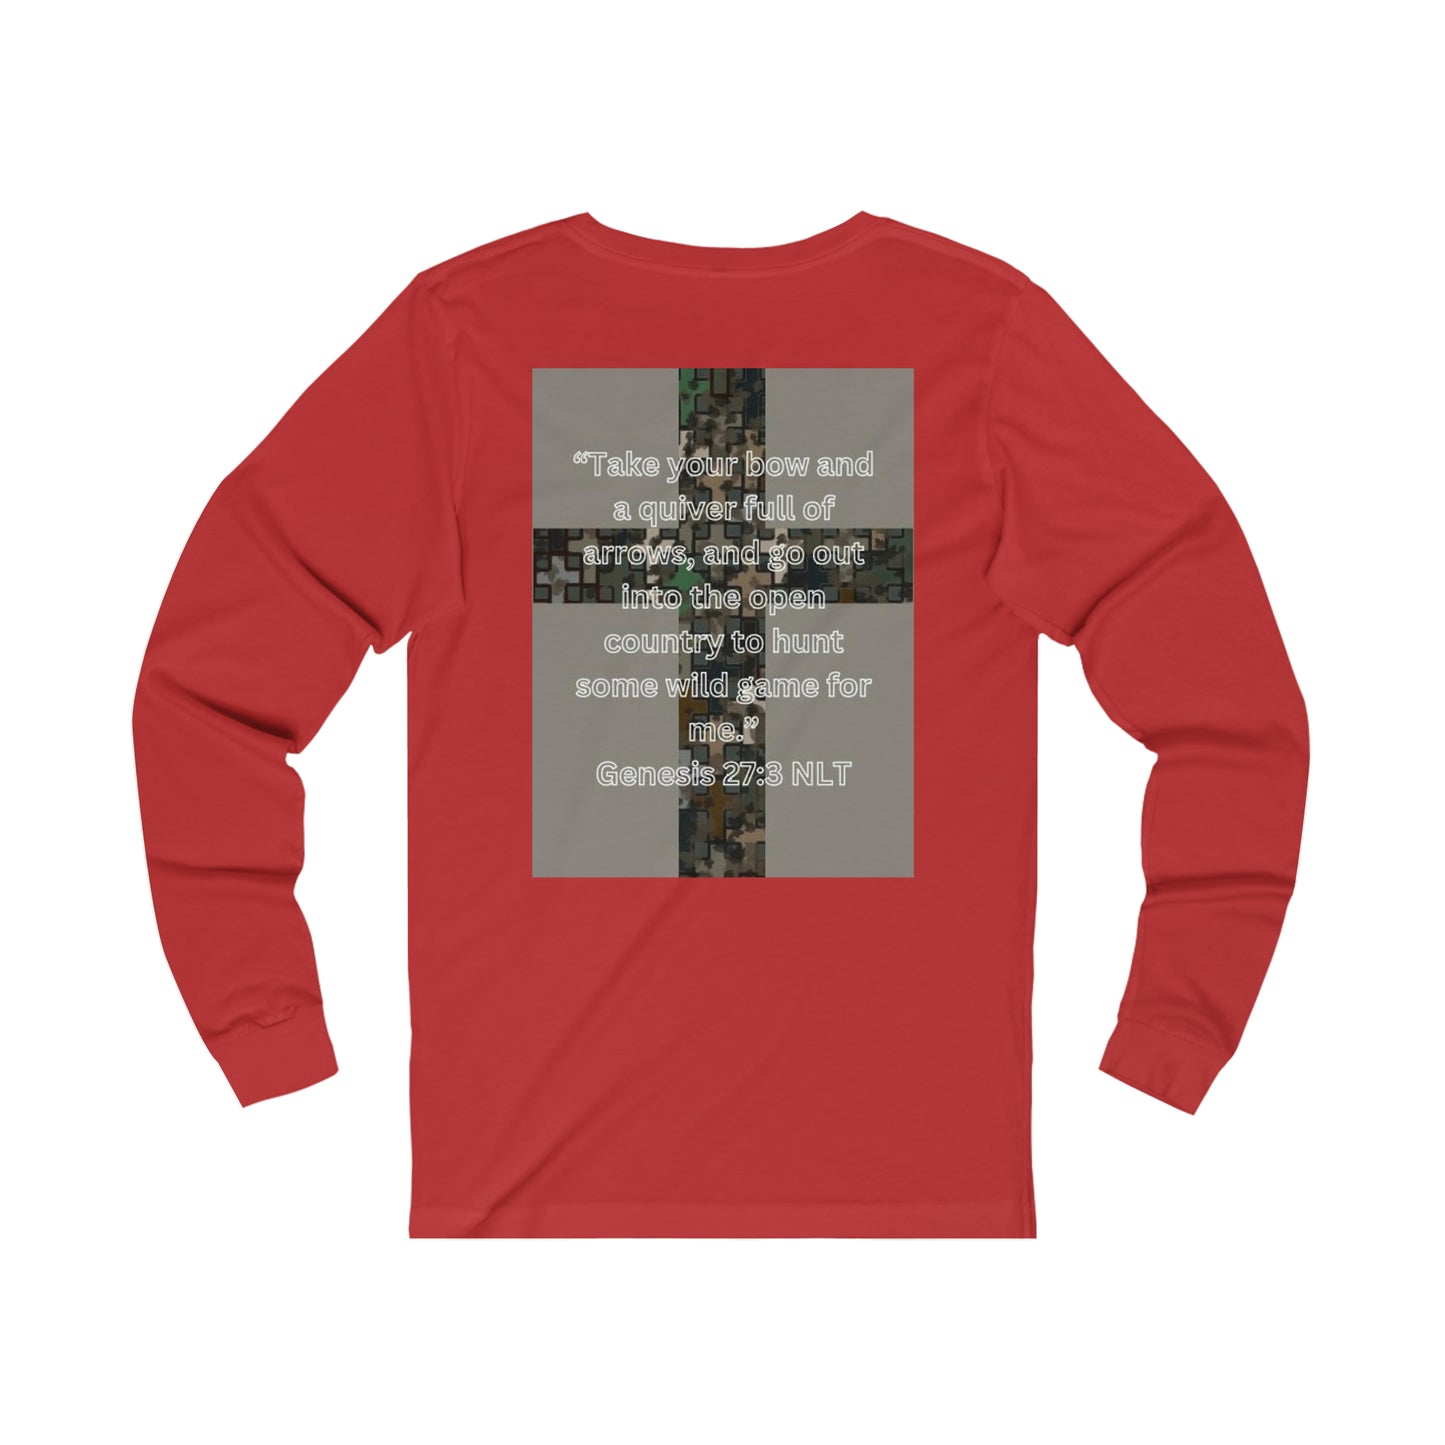 Humbled Encounters Jersey Long Sleeve T-shirt.